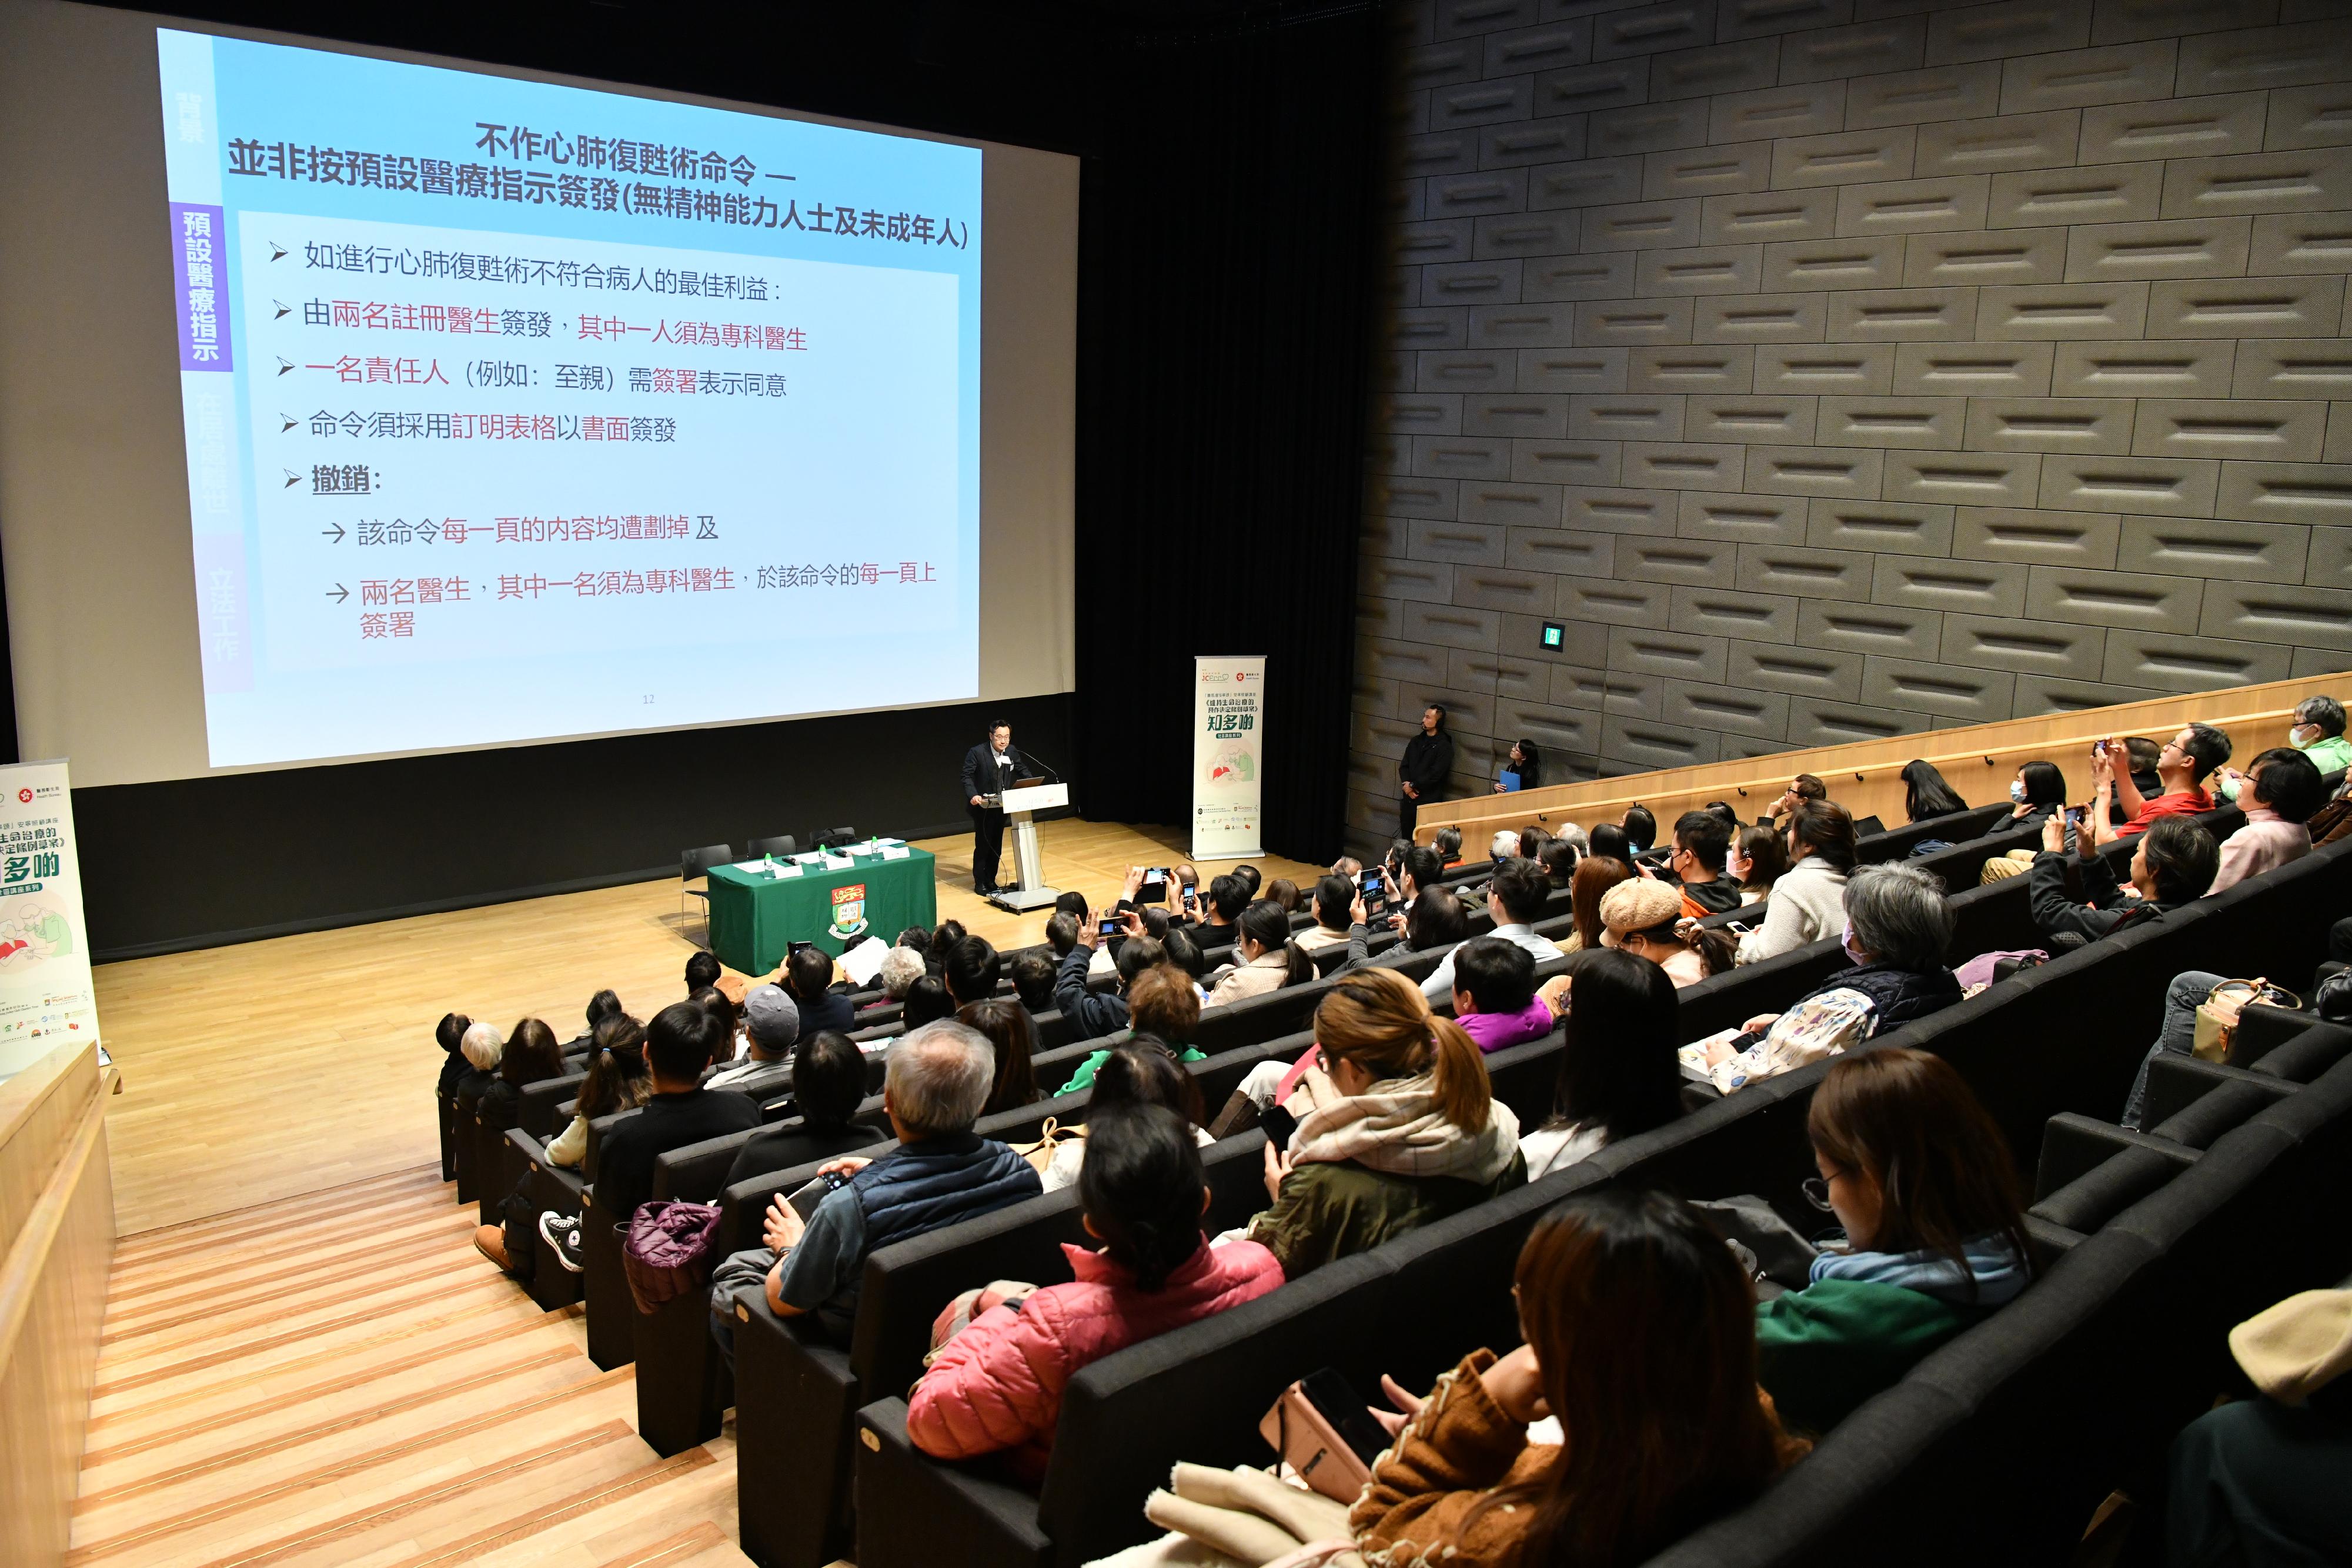 About 140 people attended the first community talk of the Advance Decision on Life-sustaining Treatment Bill community talk series today (January 27).